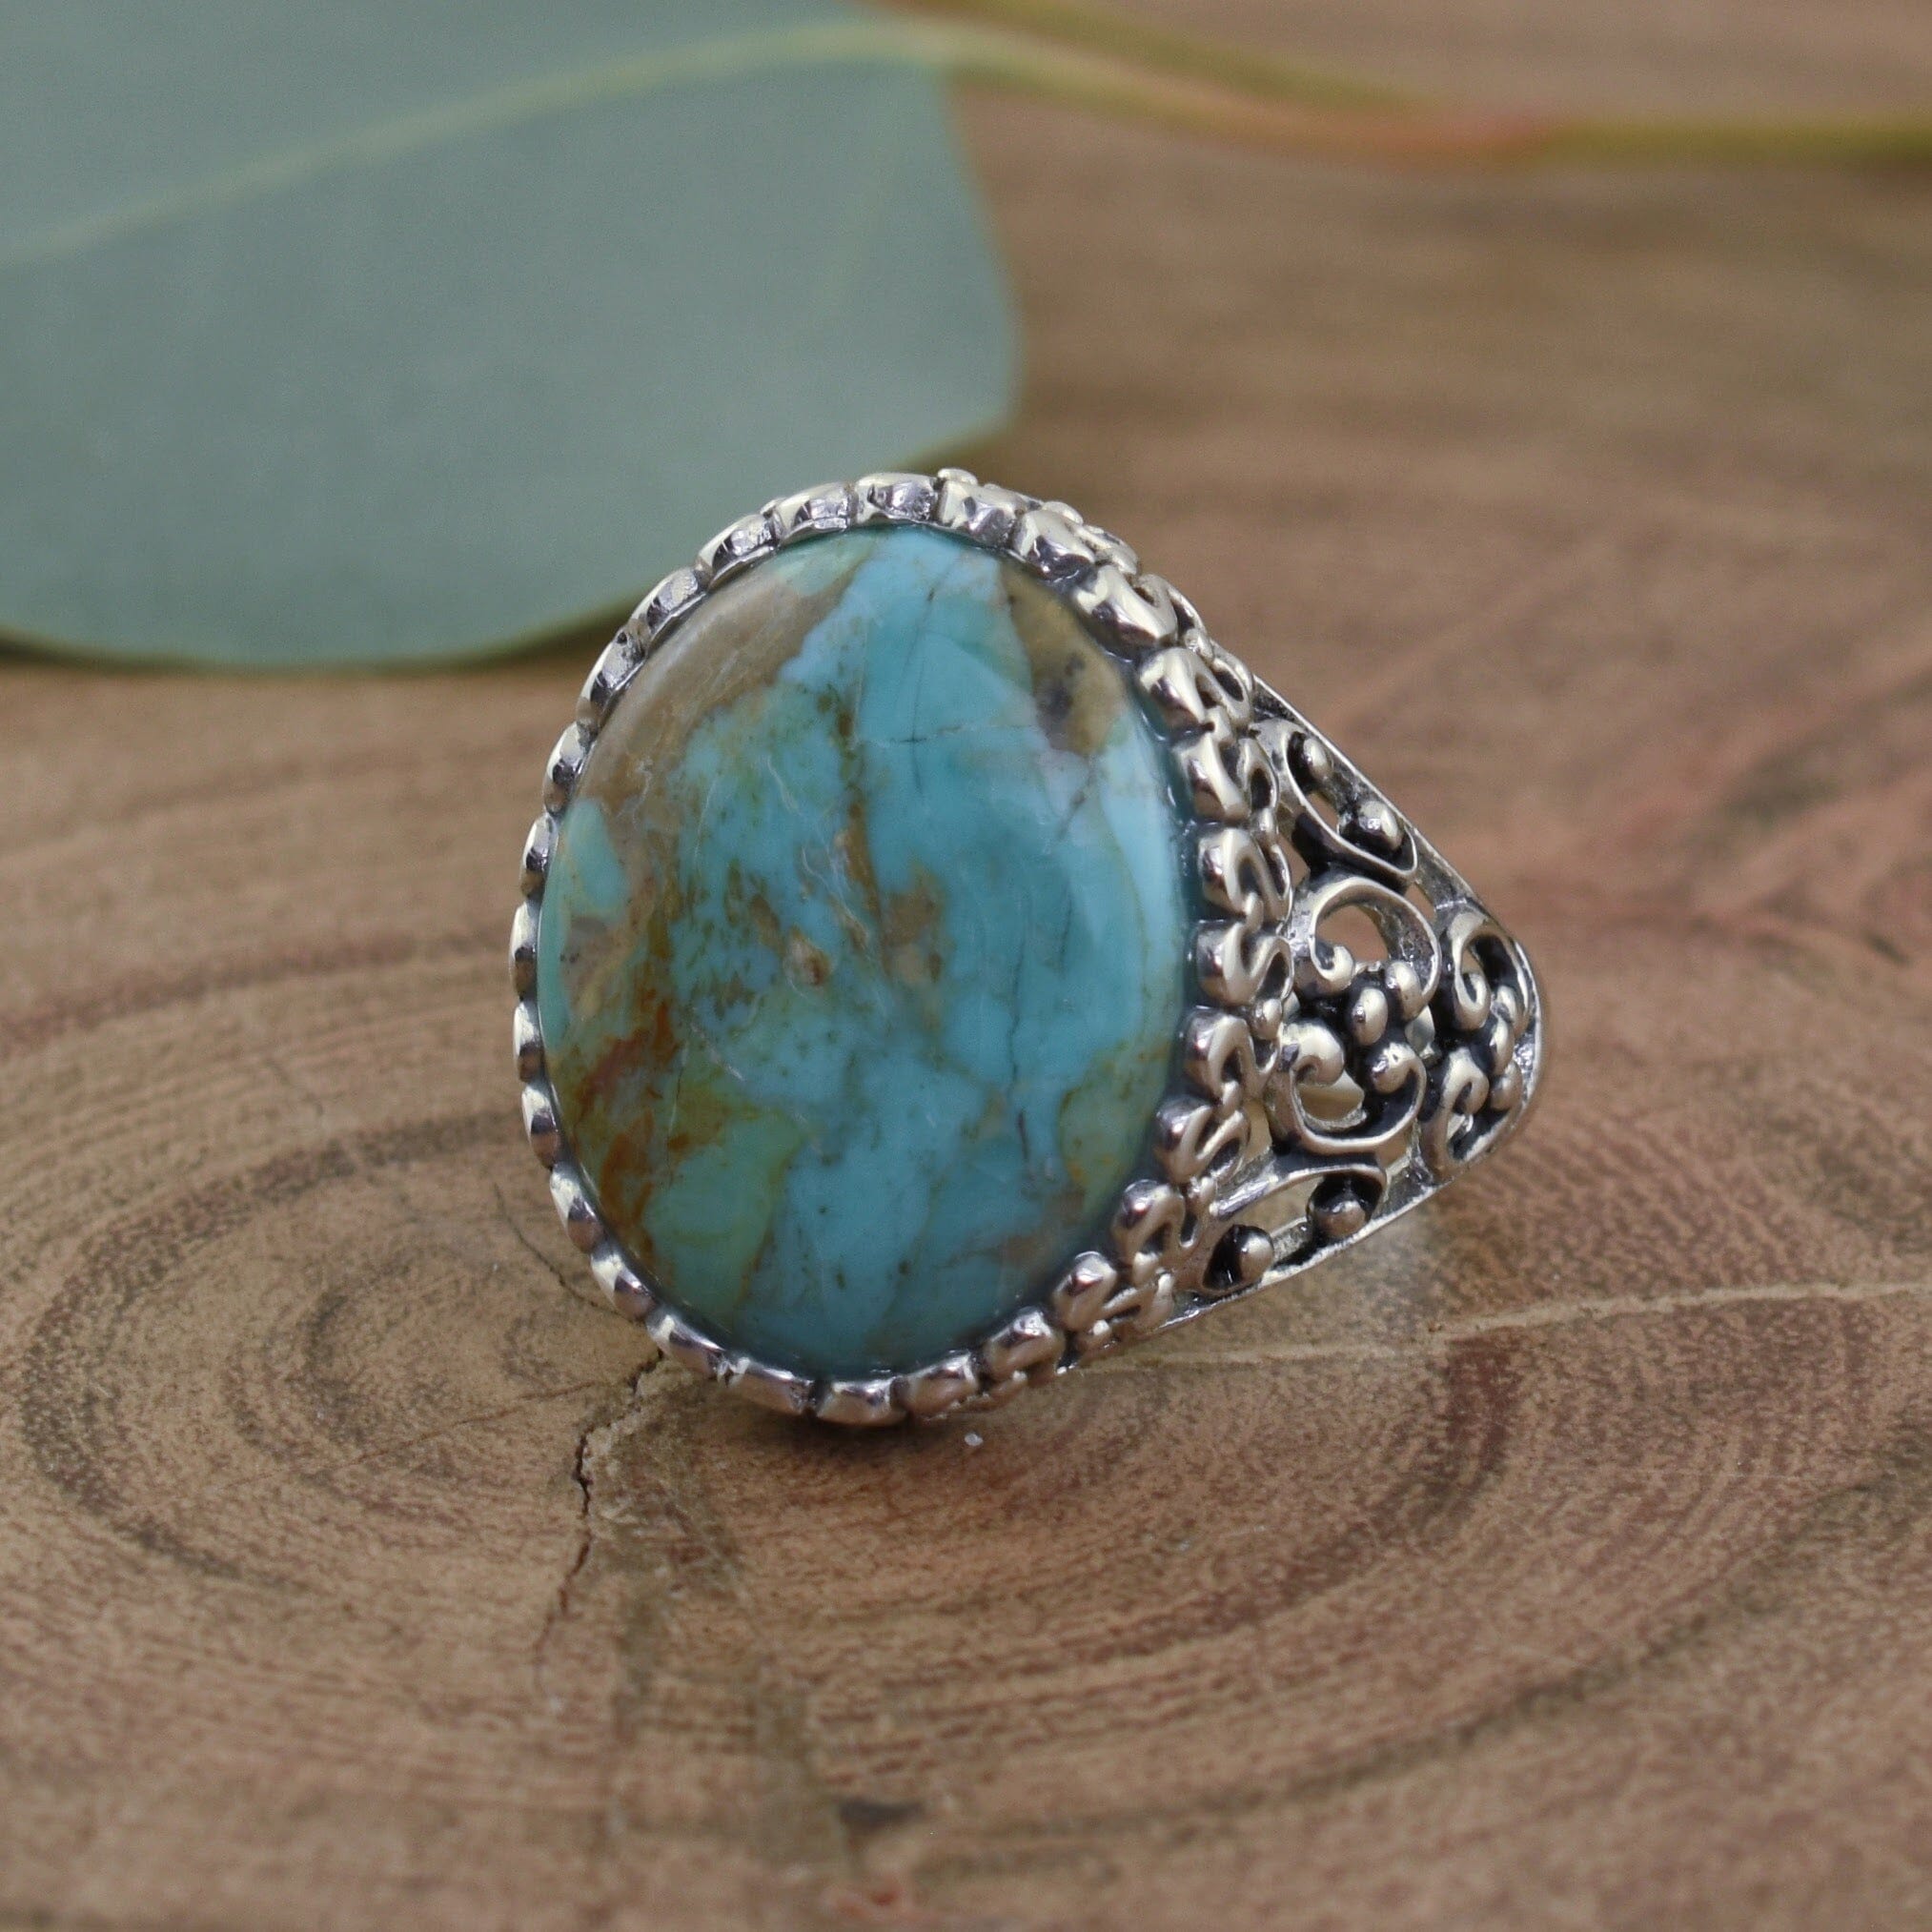 .925 sterling silver filigree ring with oval turquoise stone